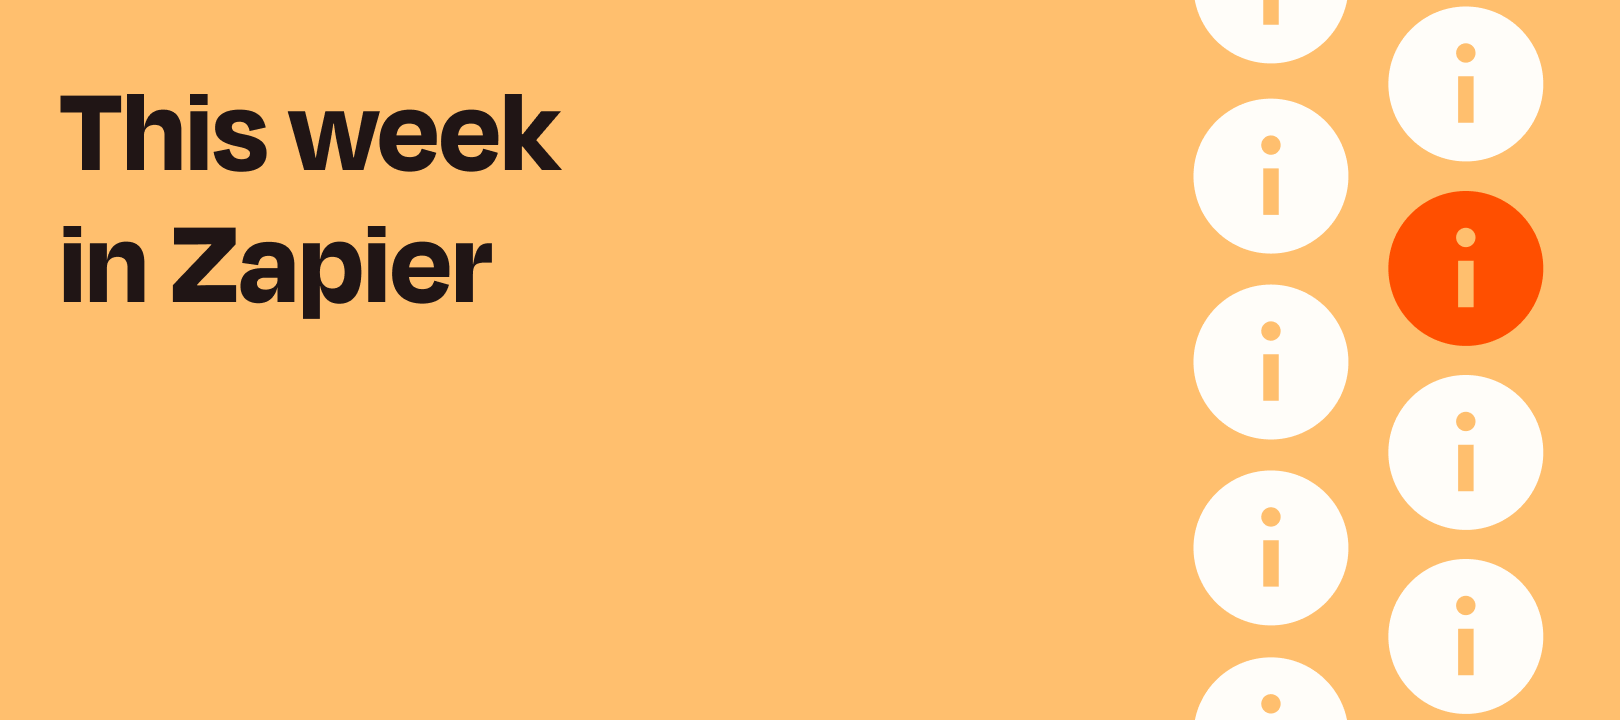 This Week in Zapier - the week of May 4th